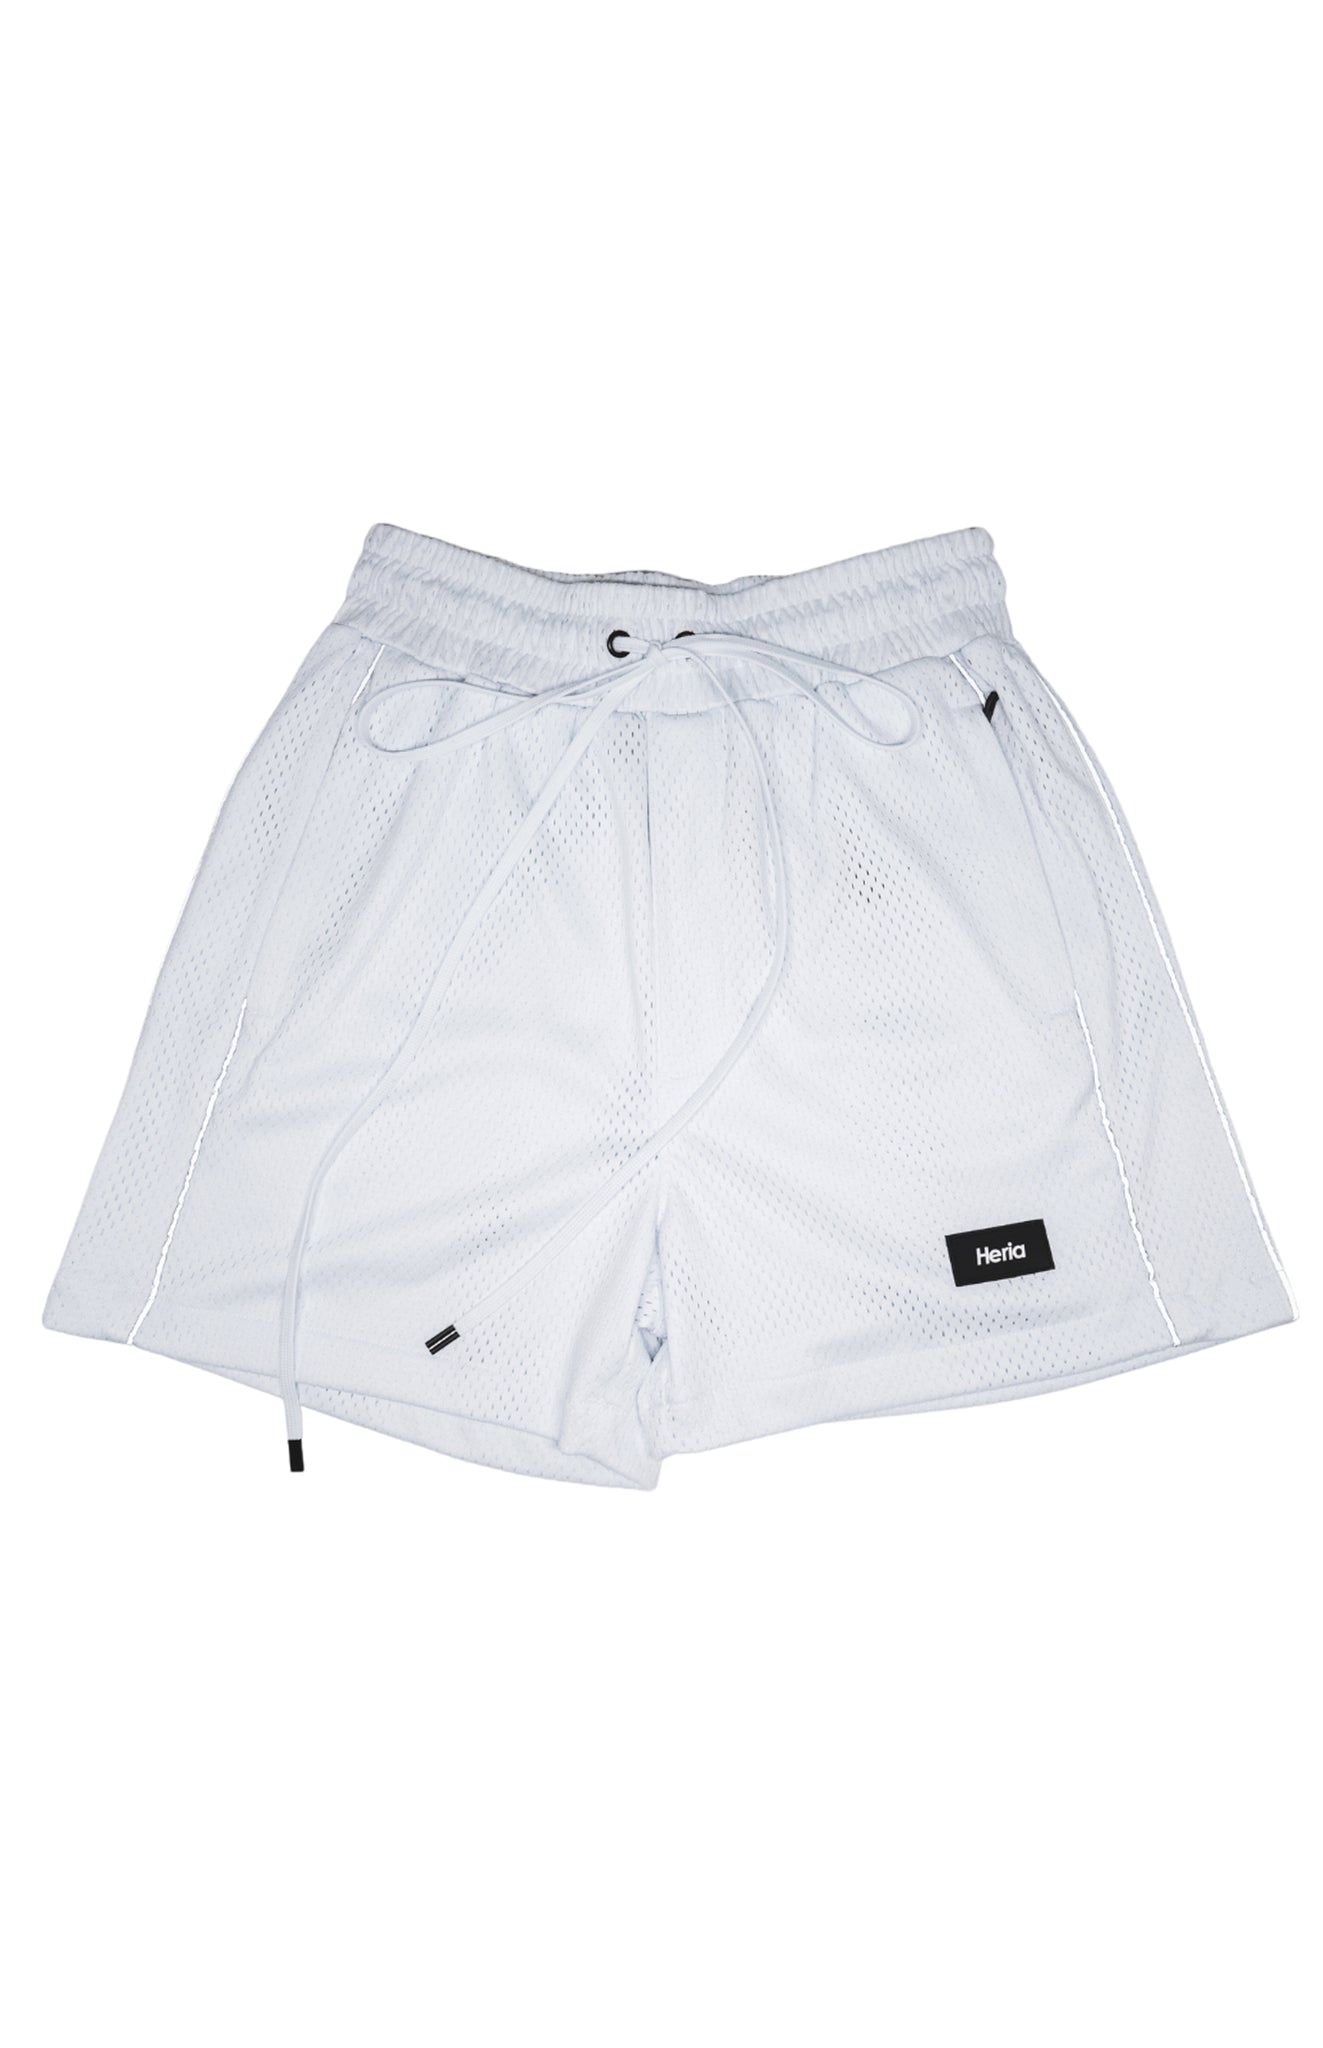 Heria Mesh Shorts with 3M Reflective Piping - White (6832739876906)